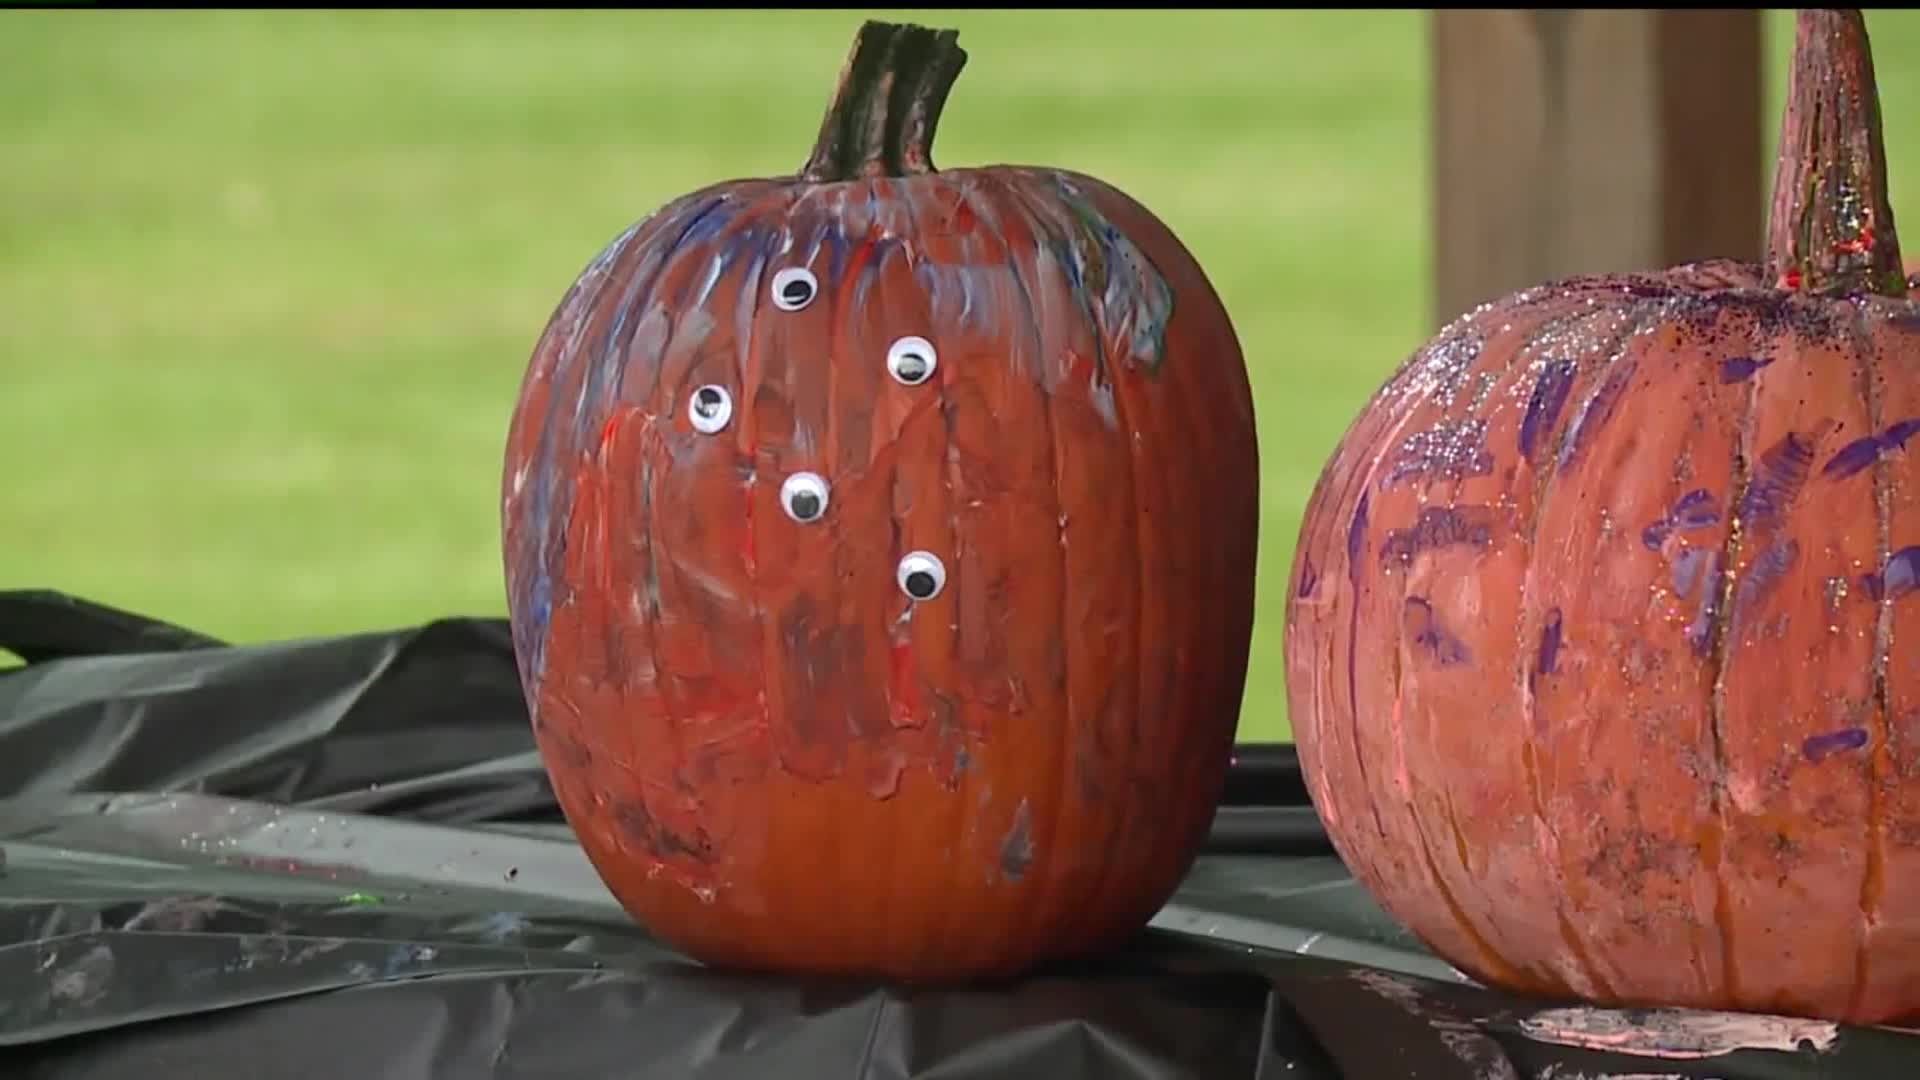 Pumpkins painted to help raise funds for Ann's Helping Hands